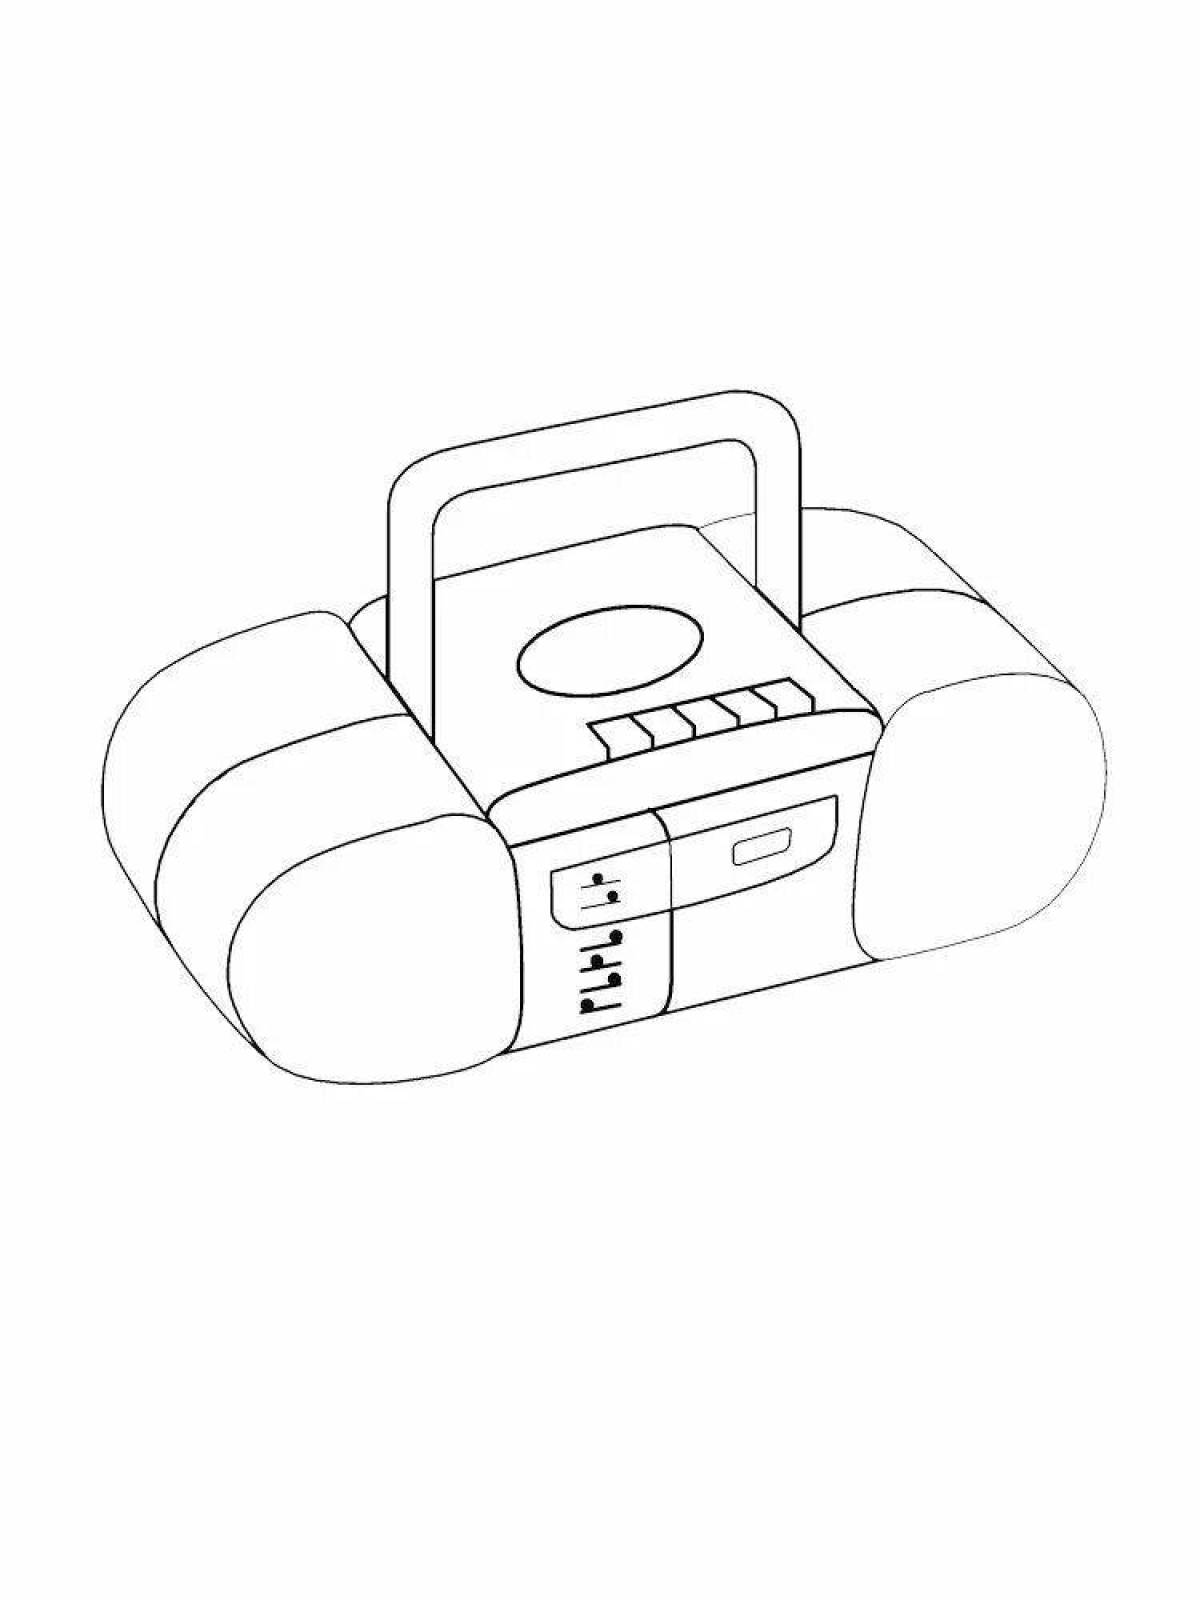 Coloring book shiny household appliances